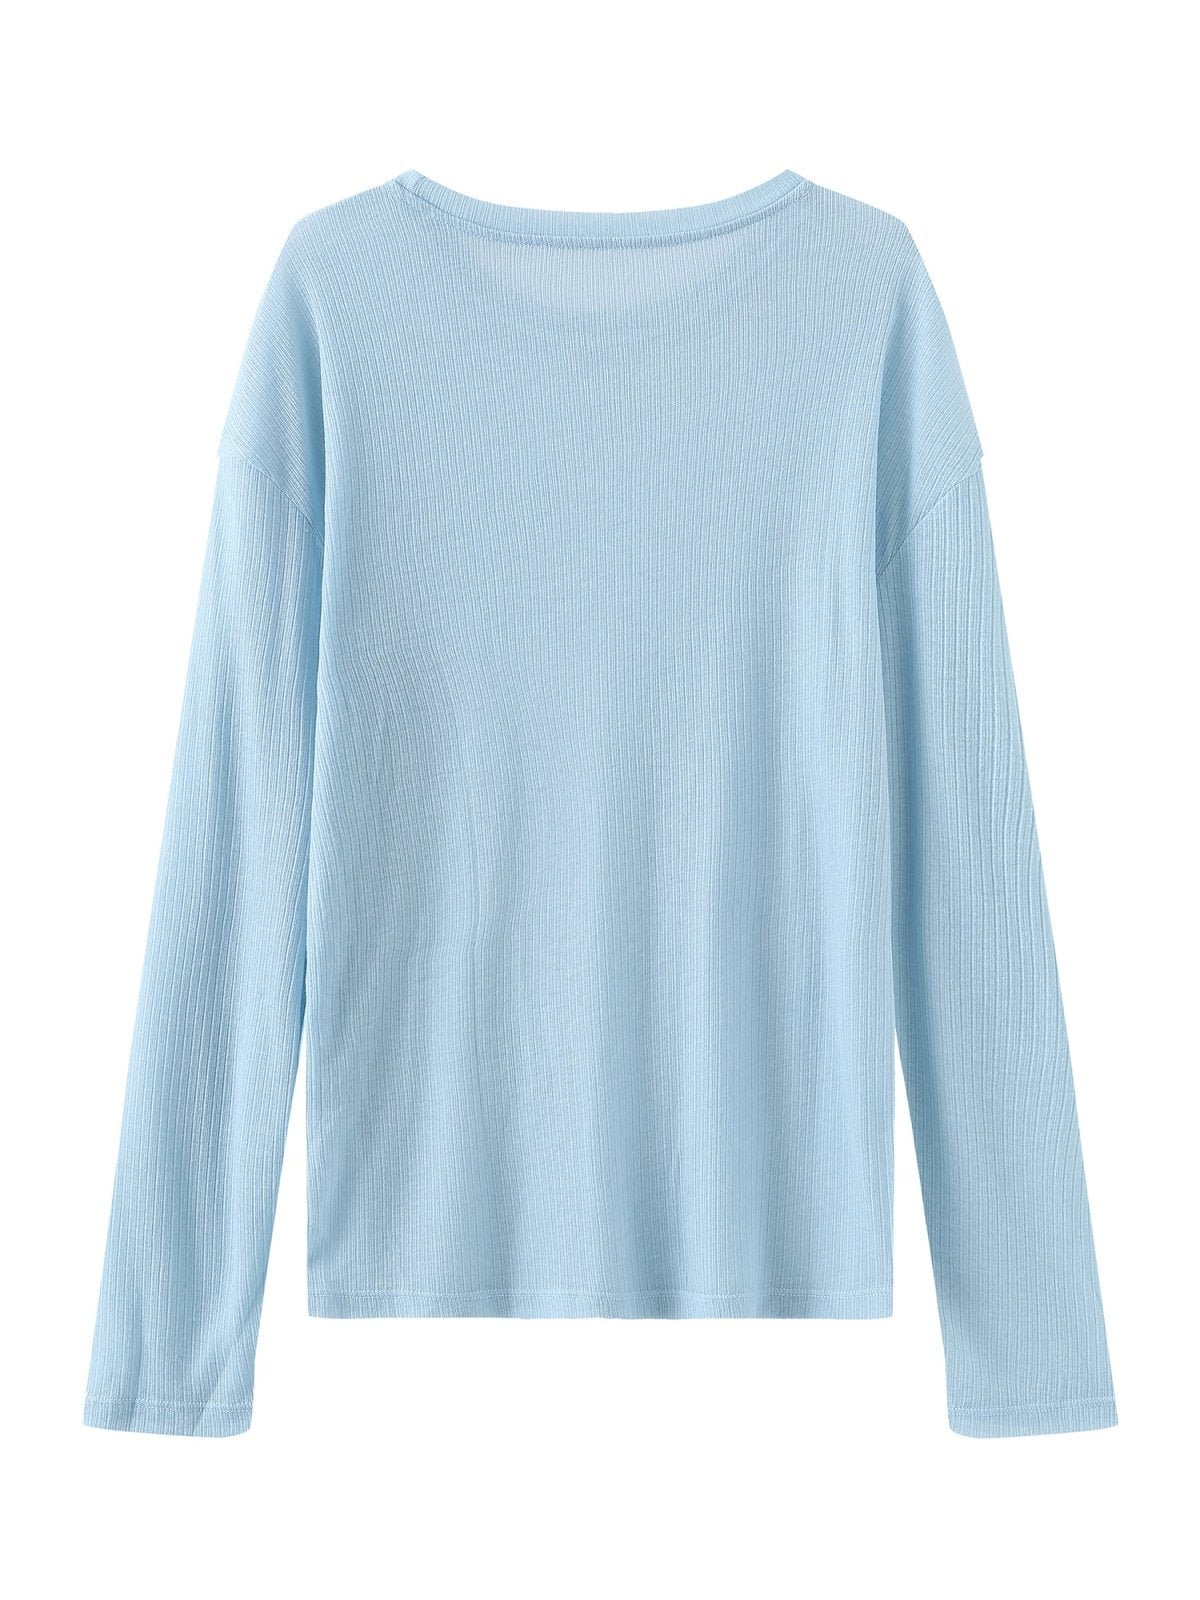 See-through Knit Top - DAG-8-9644-22BlueF - Baby Blue - F - D'zage Designs